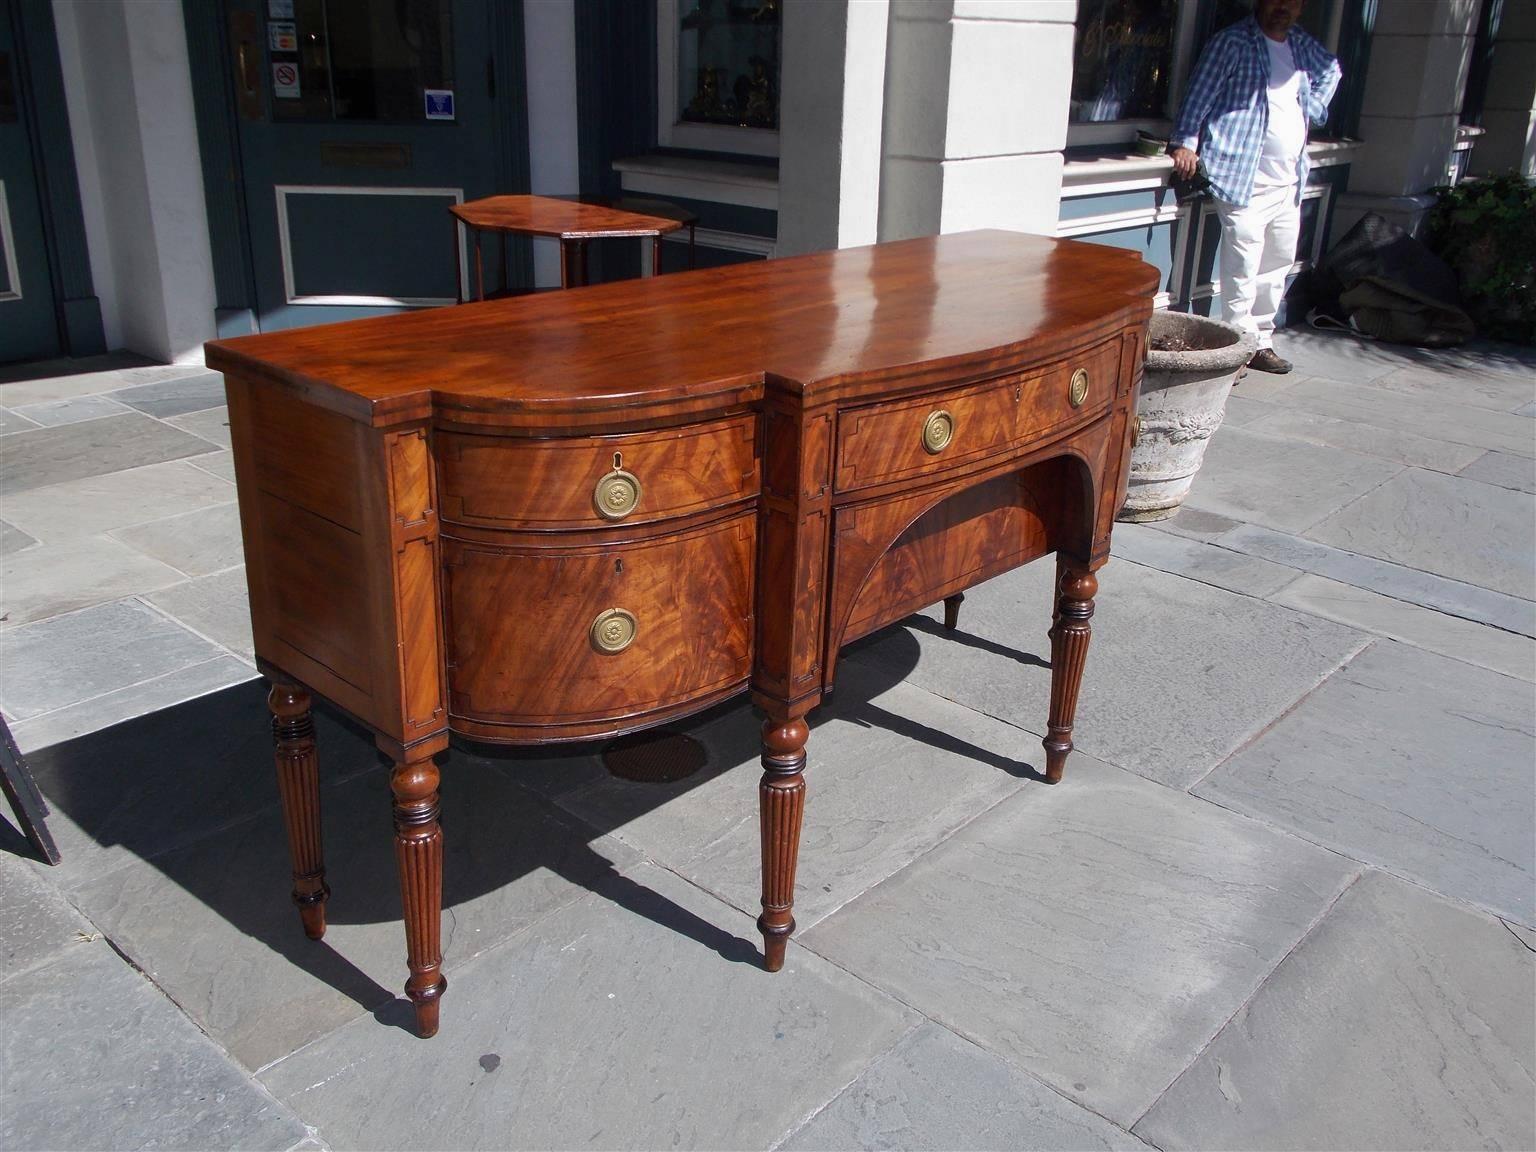 Hand-Carved English Regency Mahogany Bow Front Ebony Inlaid Sideboard, Circa 1800 For Sale